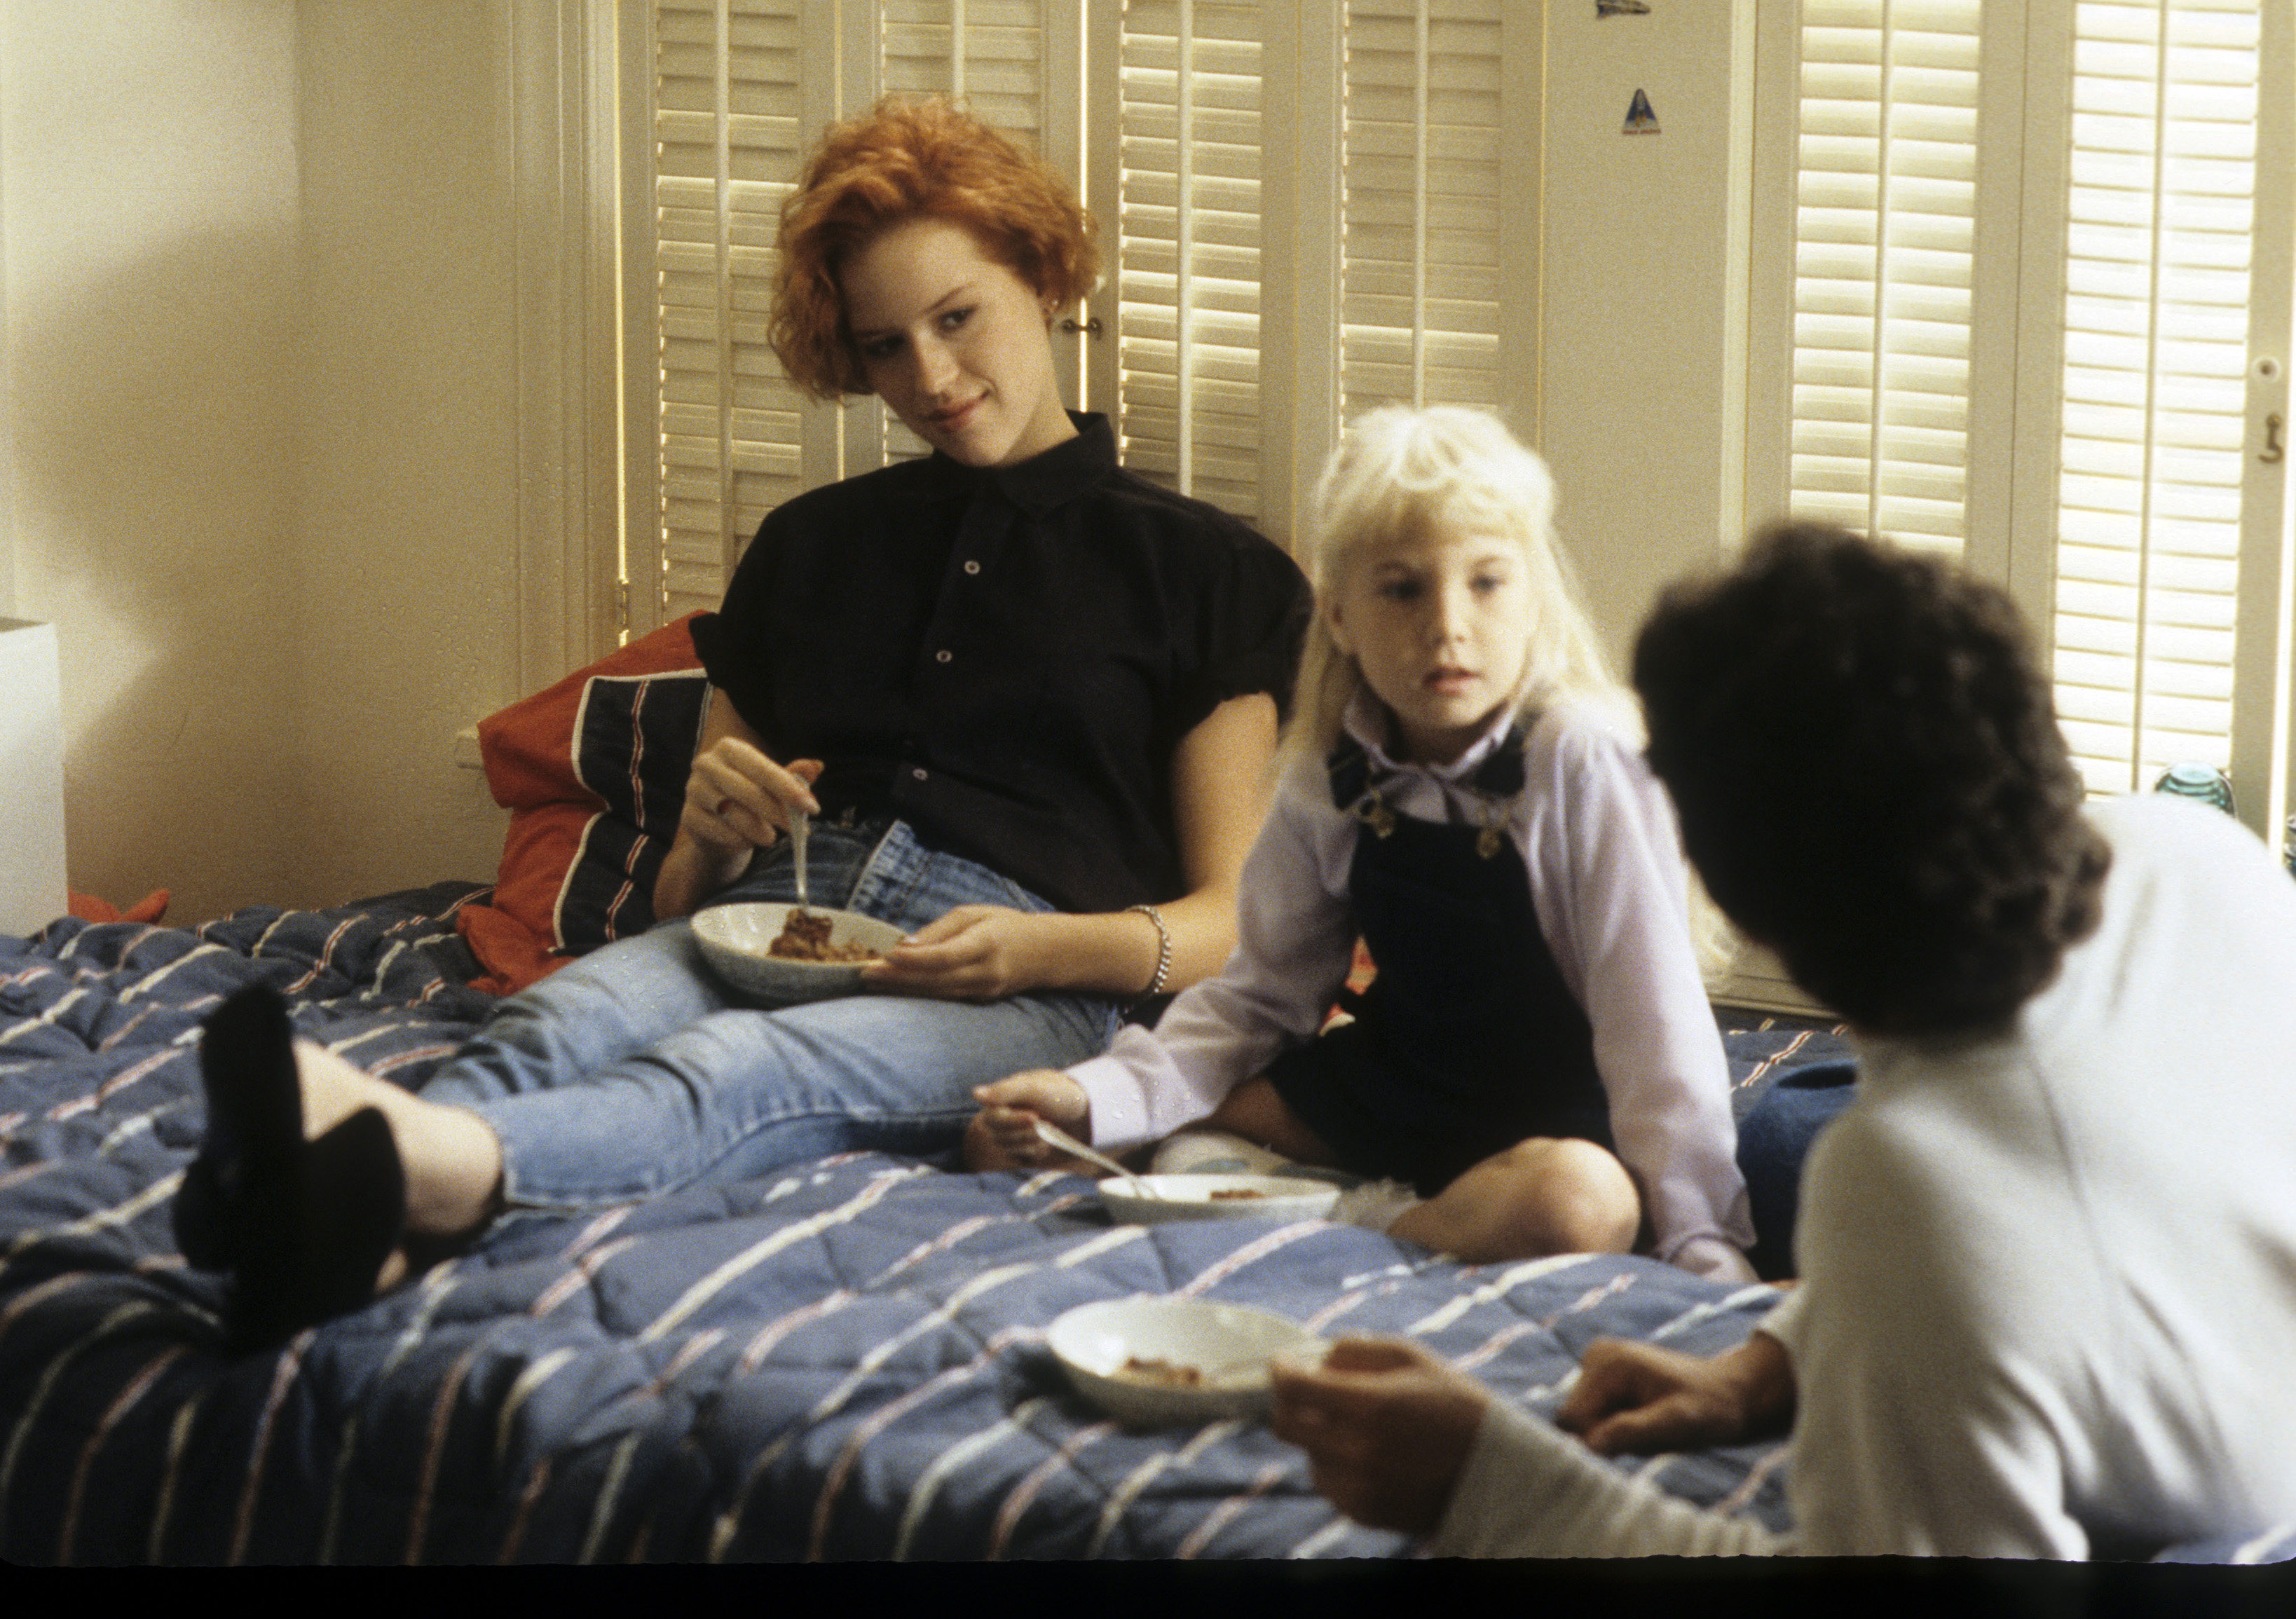 Molly Ringwald, Heather O'Rourke, and Zach Galligan in the set of “Surviving: A Family in Crisis” on February 10, 1985. | Source: Getty Images